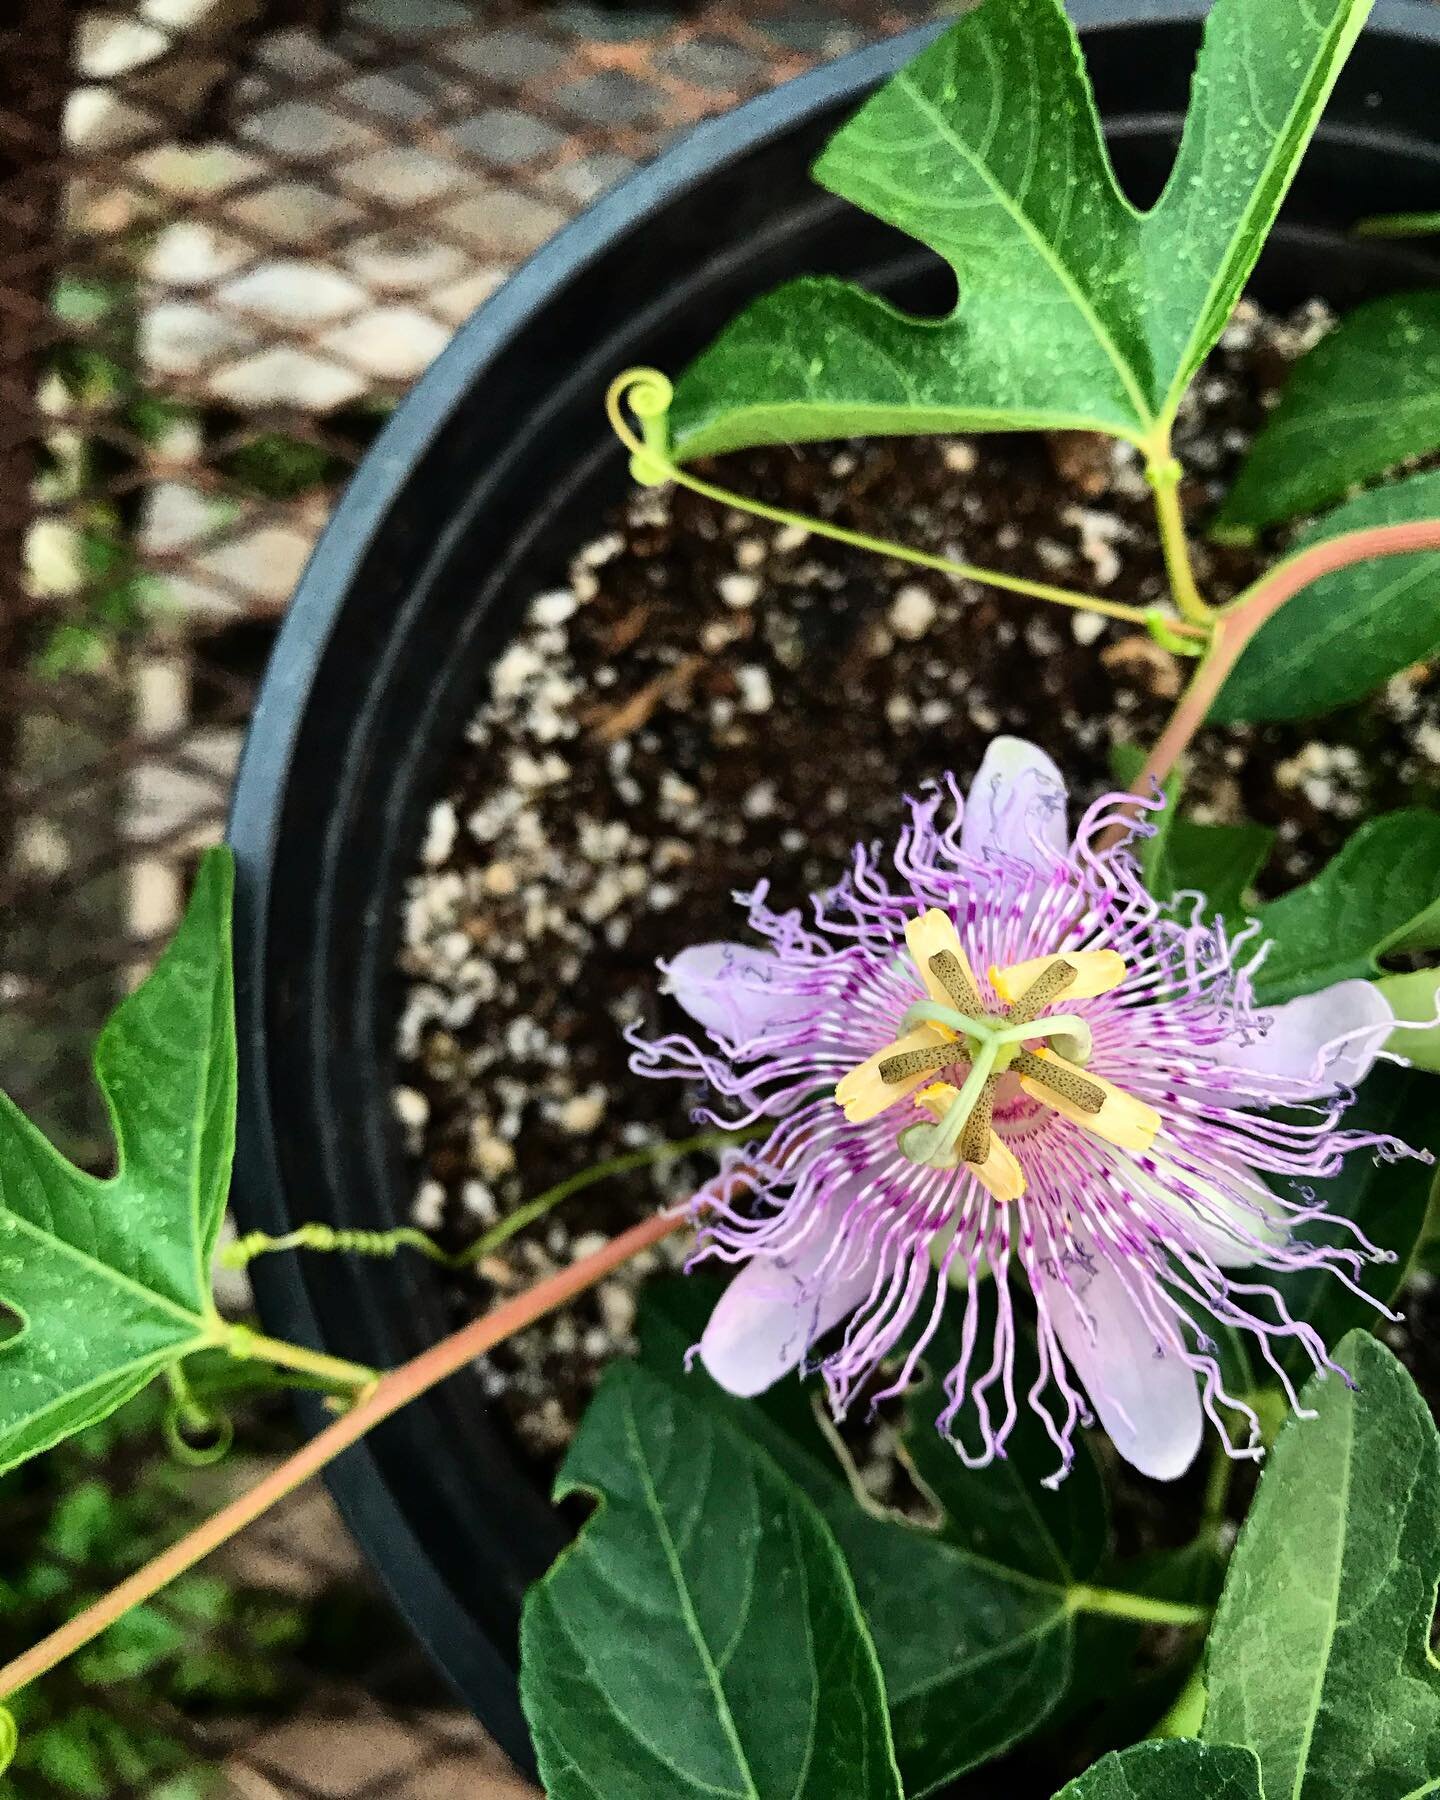 I&rsquo;m on a passionflower mission✨We decided to grow these in pots in the greenhouse this year. We&rsquo;re doing this so we can dig up the roots to make divisions to make more passionflower babies. We&rsquo;ve always started it from seed, but as 